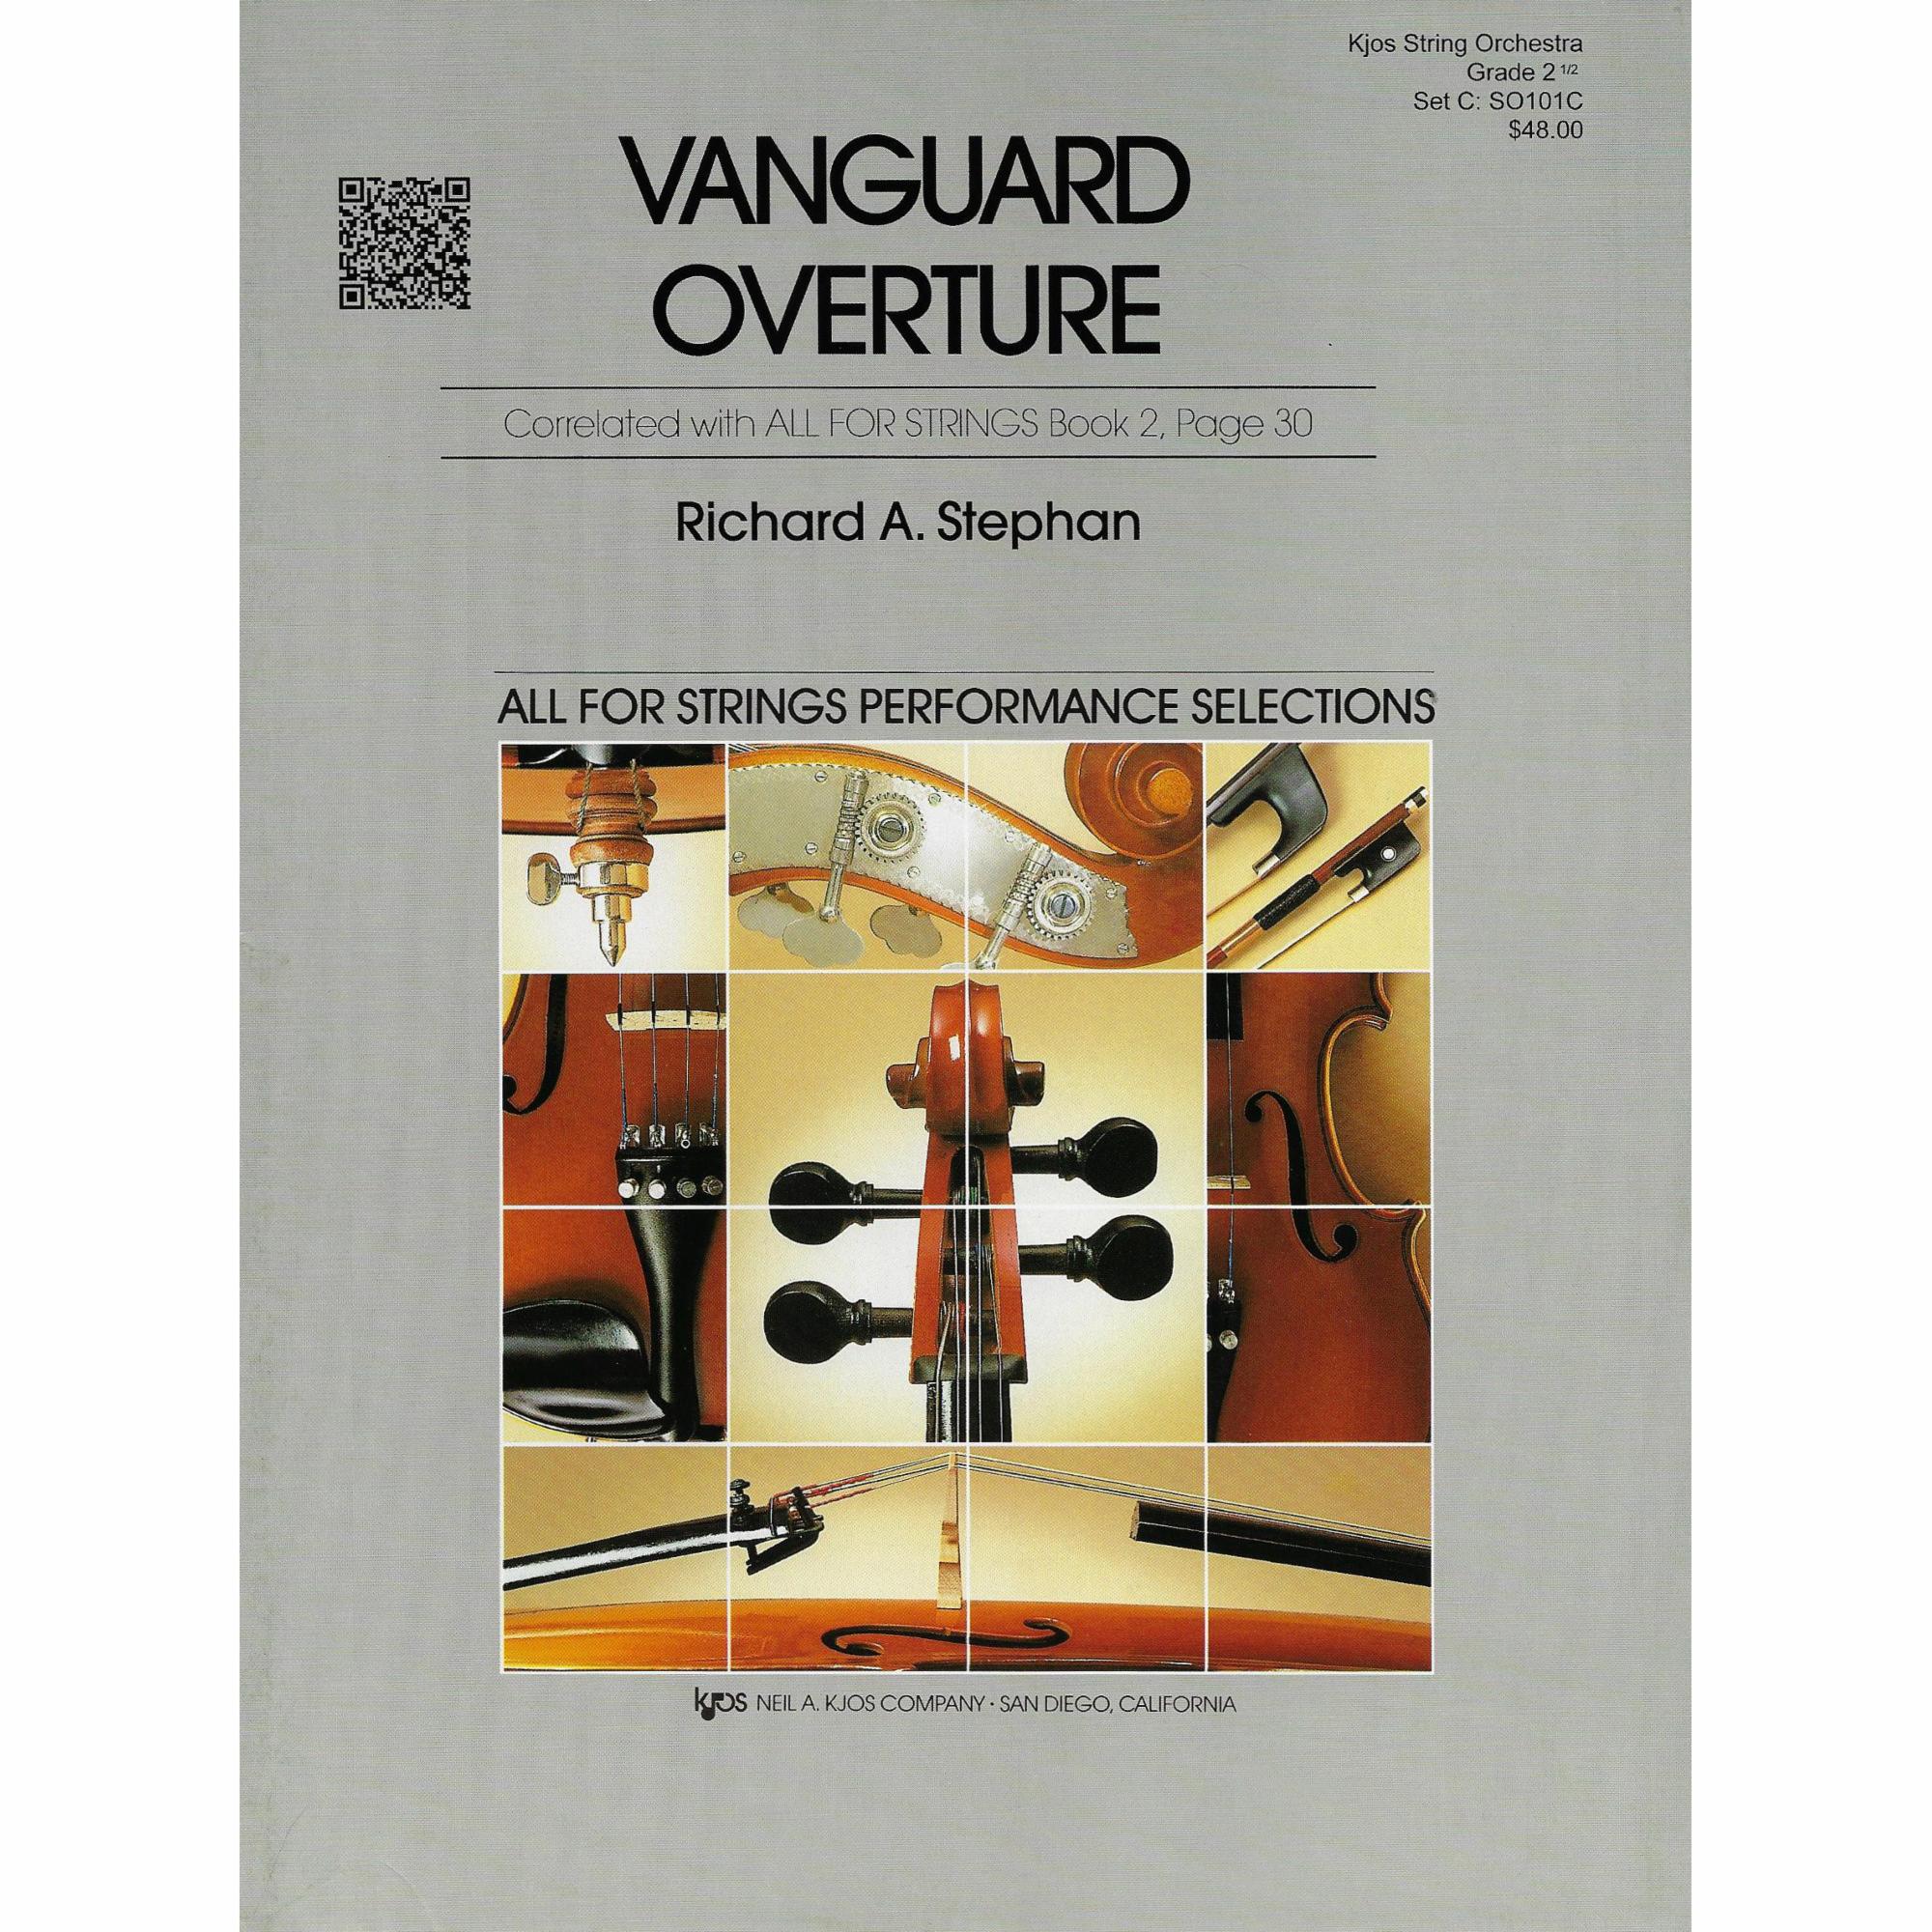 Vanguard Overture for String Orchestra